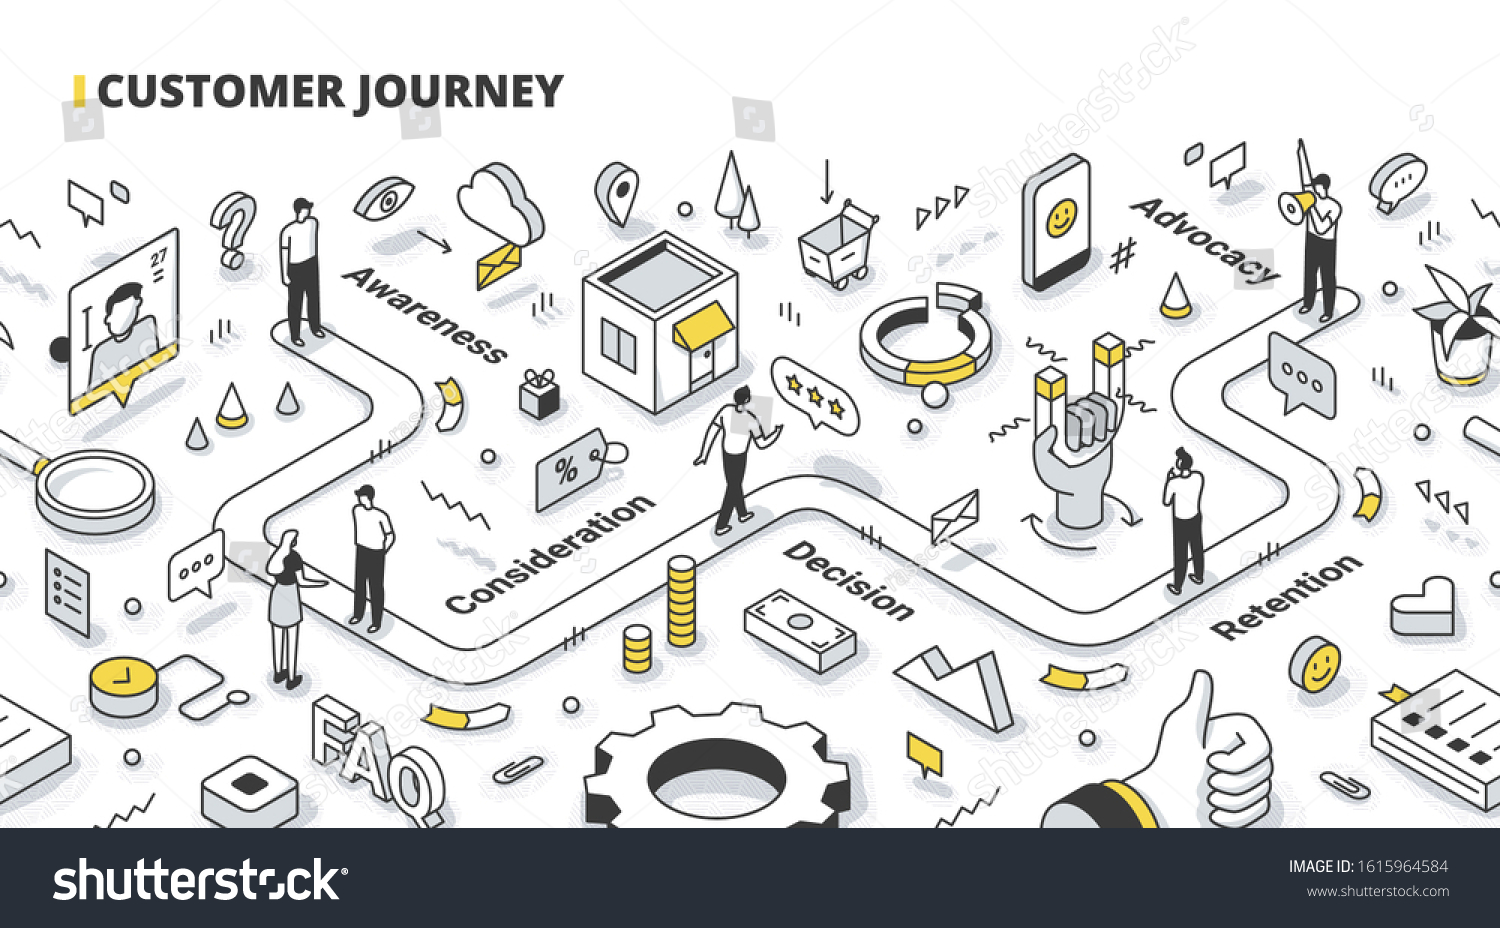 Marketing concept demonstrating the main stages of a customer journey. A man moves on the map of the purchase process. Isometric outline illustration for web banners, hero images, printed materials #1615964584